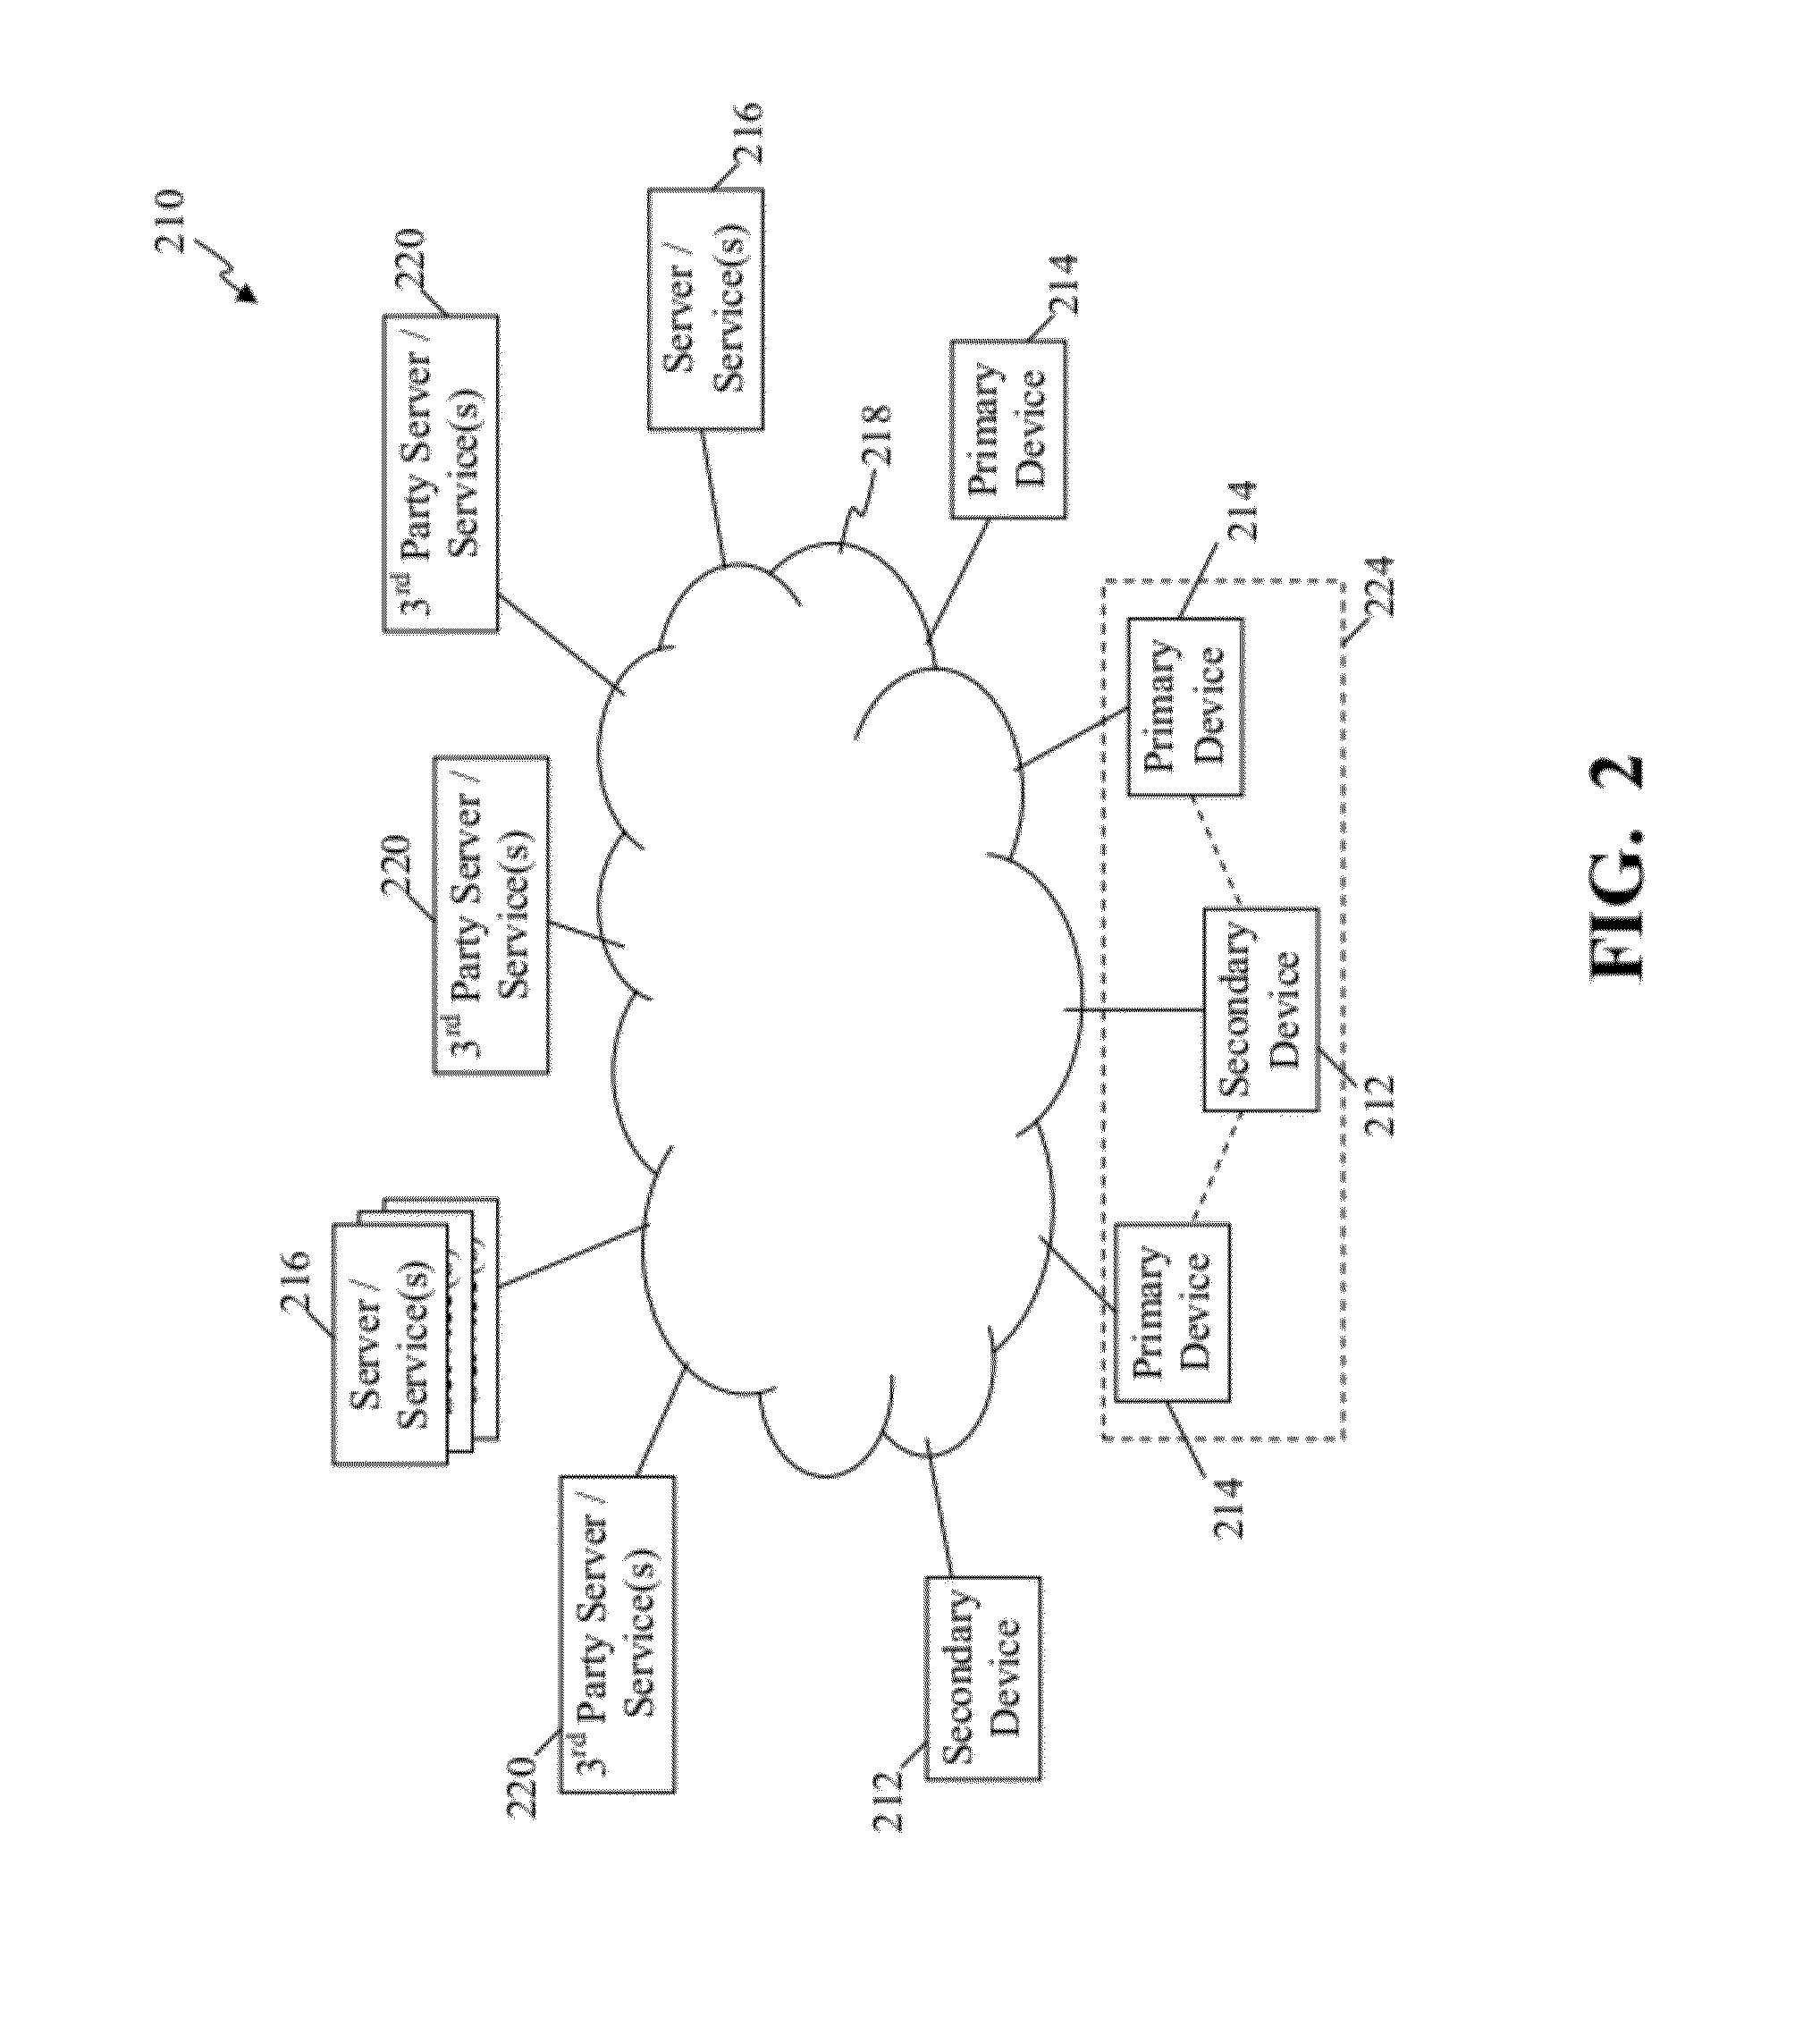 Methods and systems for use in providing access through a secondary device to services intended for a primary device